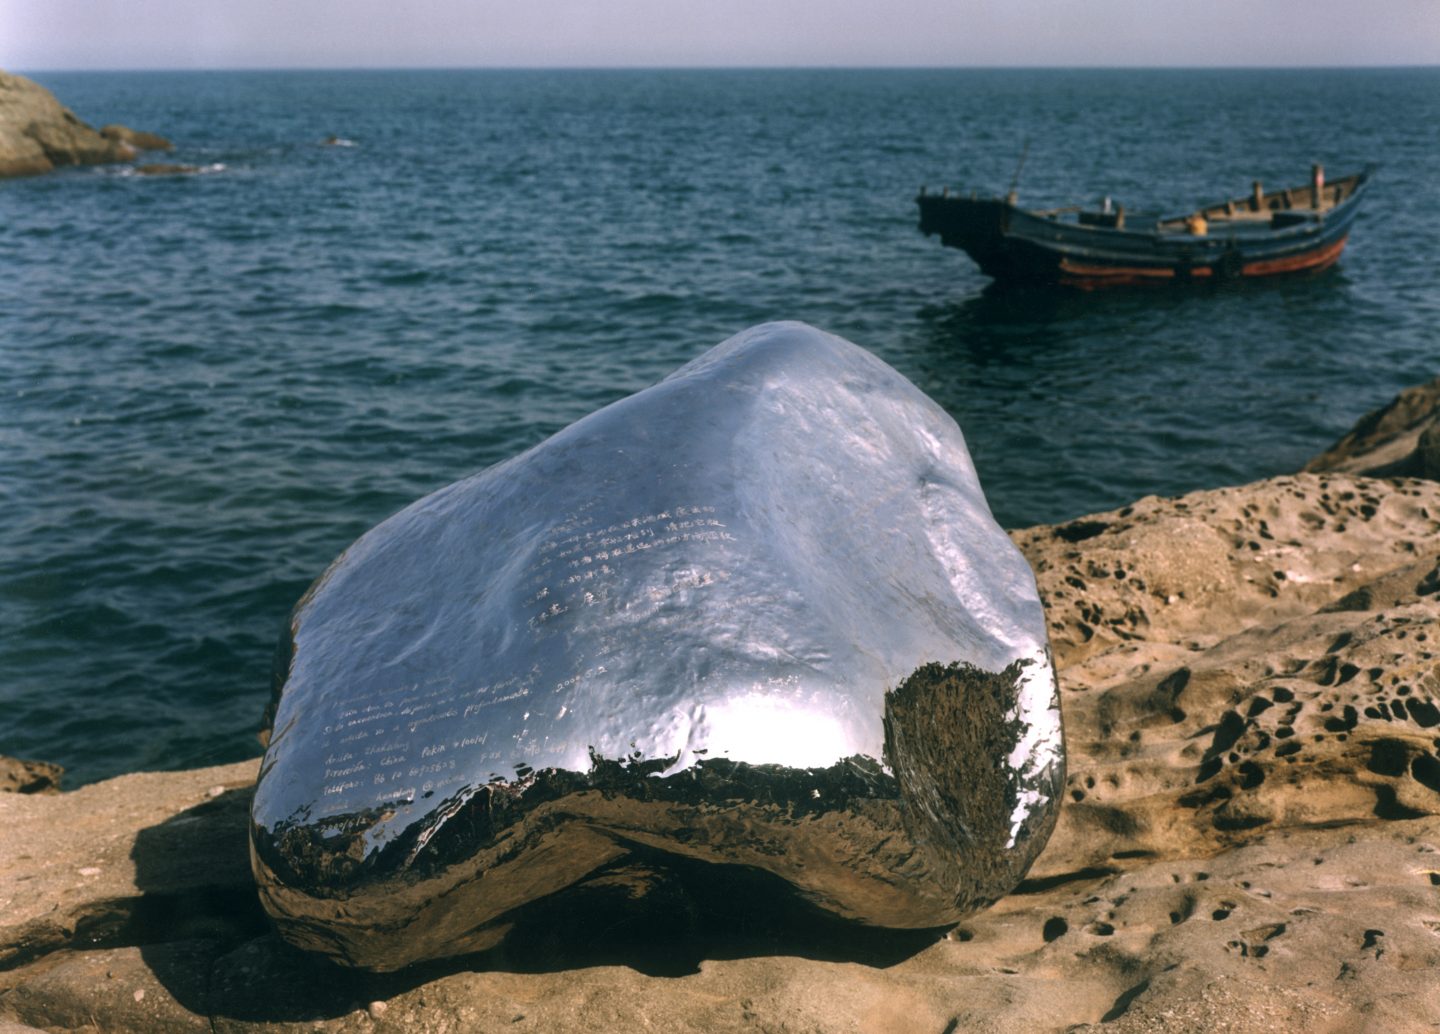 A large, shiny silver rock-like object rests on a rocky shoreline. A small boat floats in the water nearby.